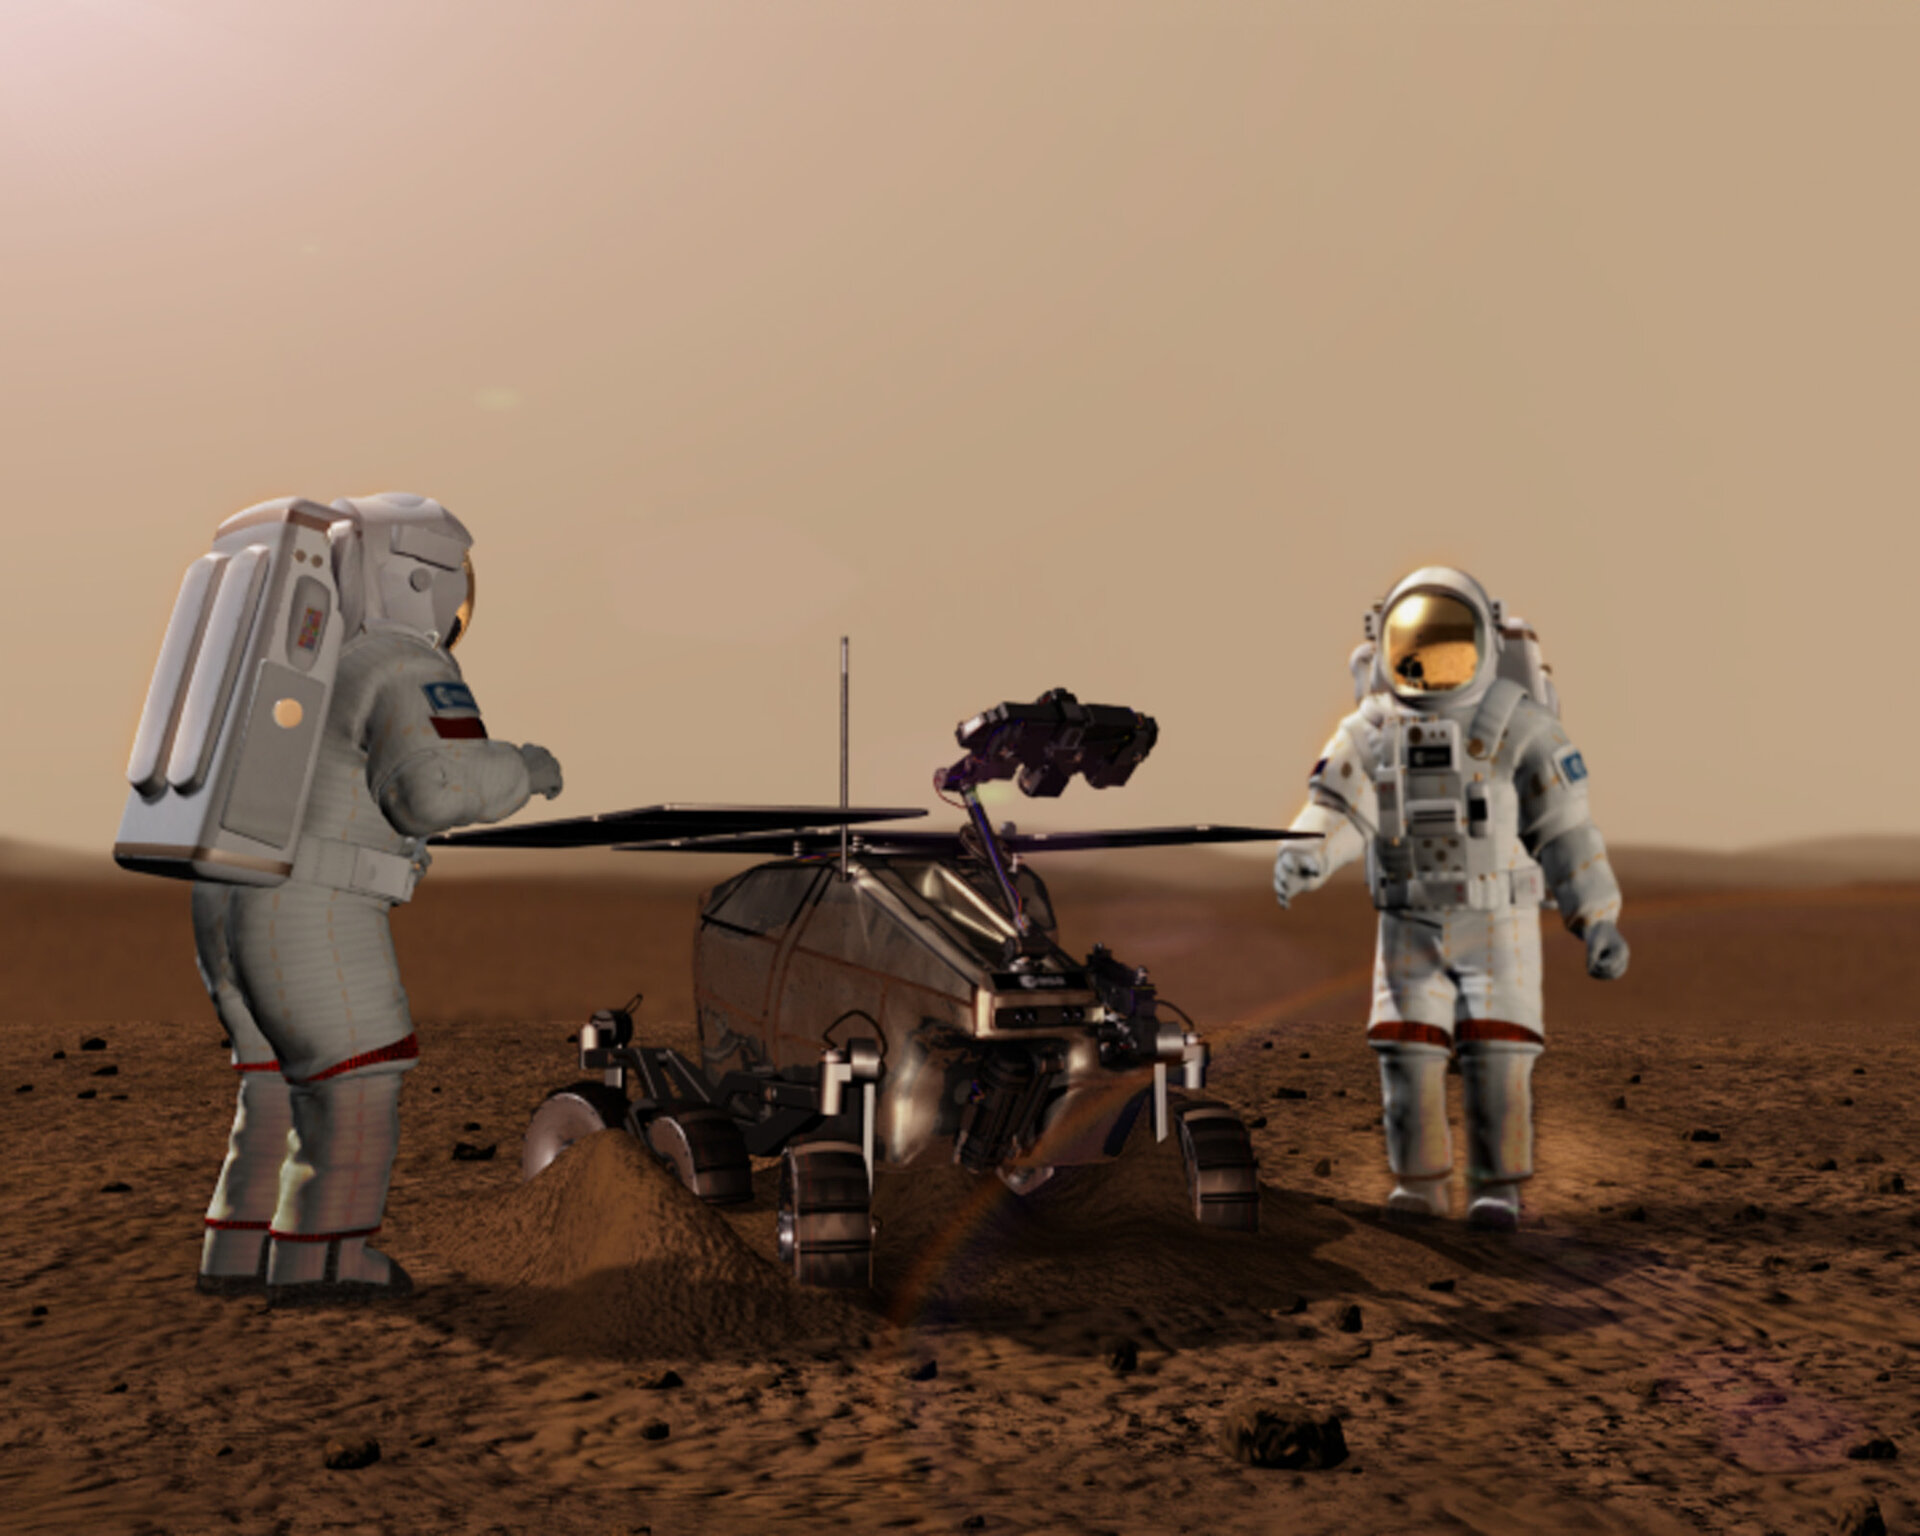 An artist's impression on human space exploration